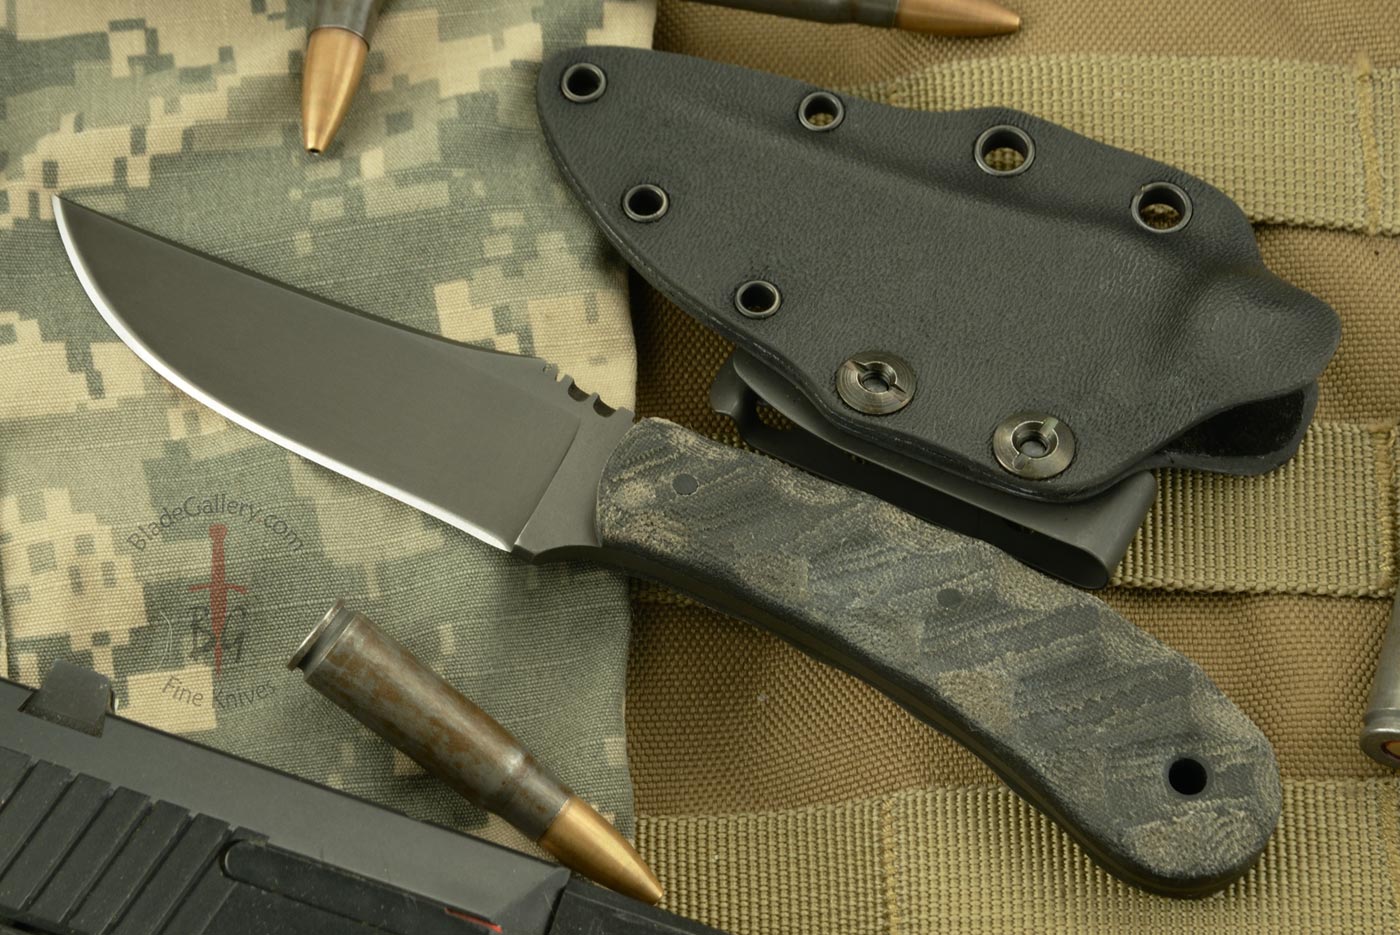 Standard Duty 1 (SD1) with Sculpted Black Micarta